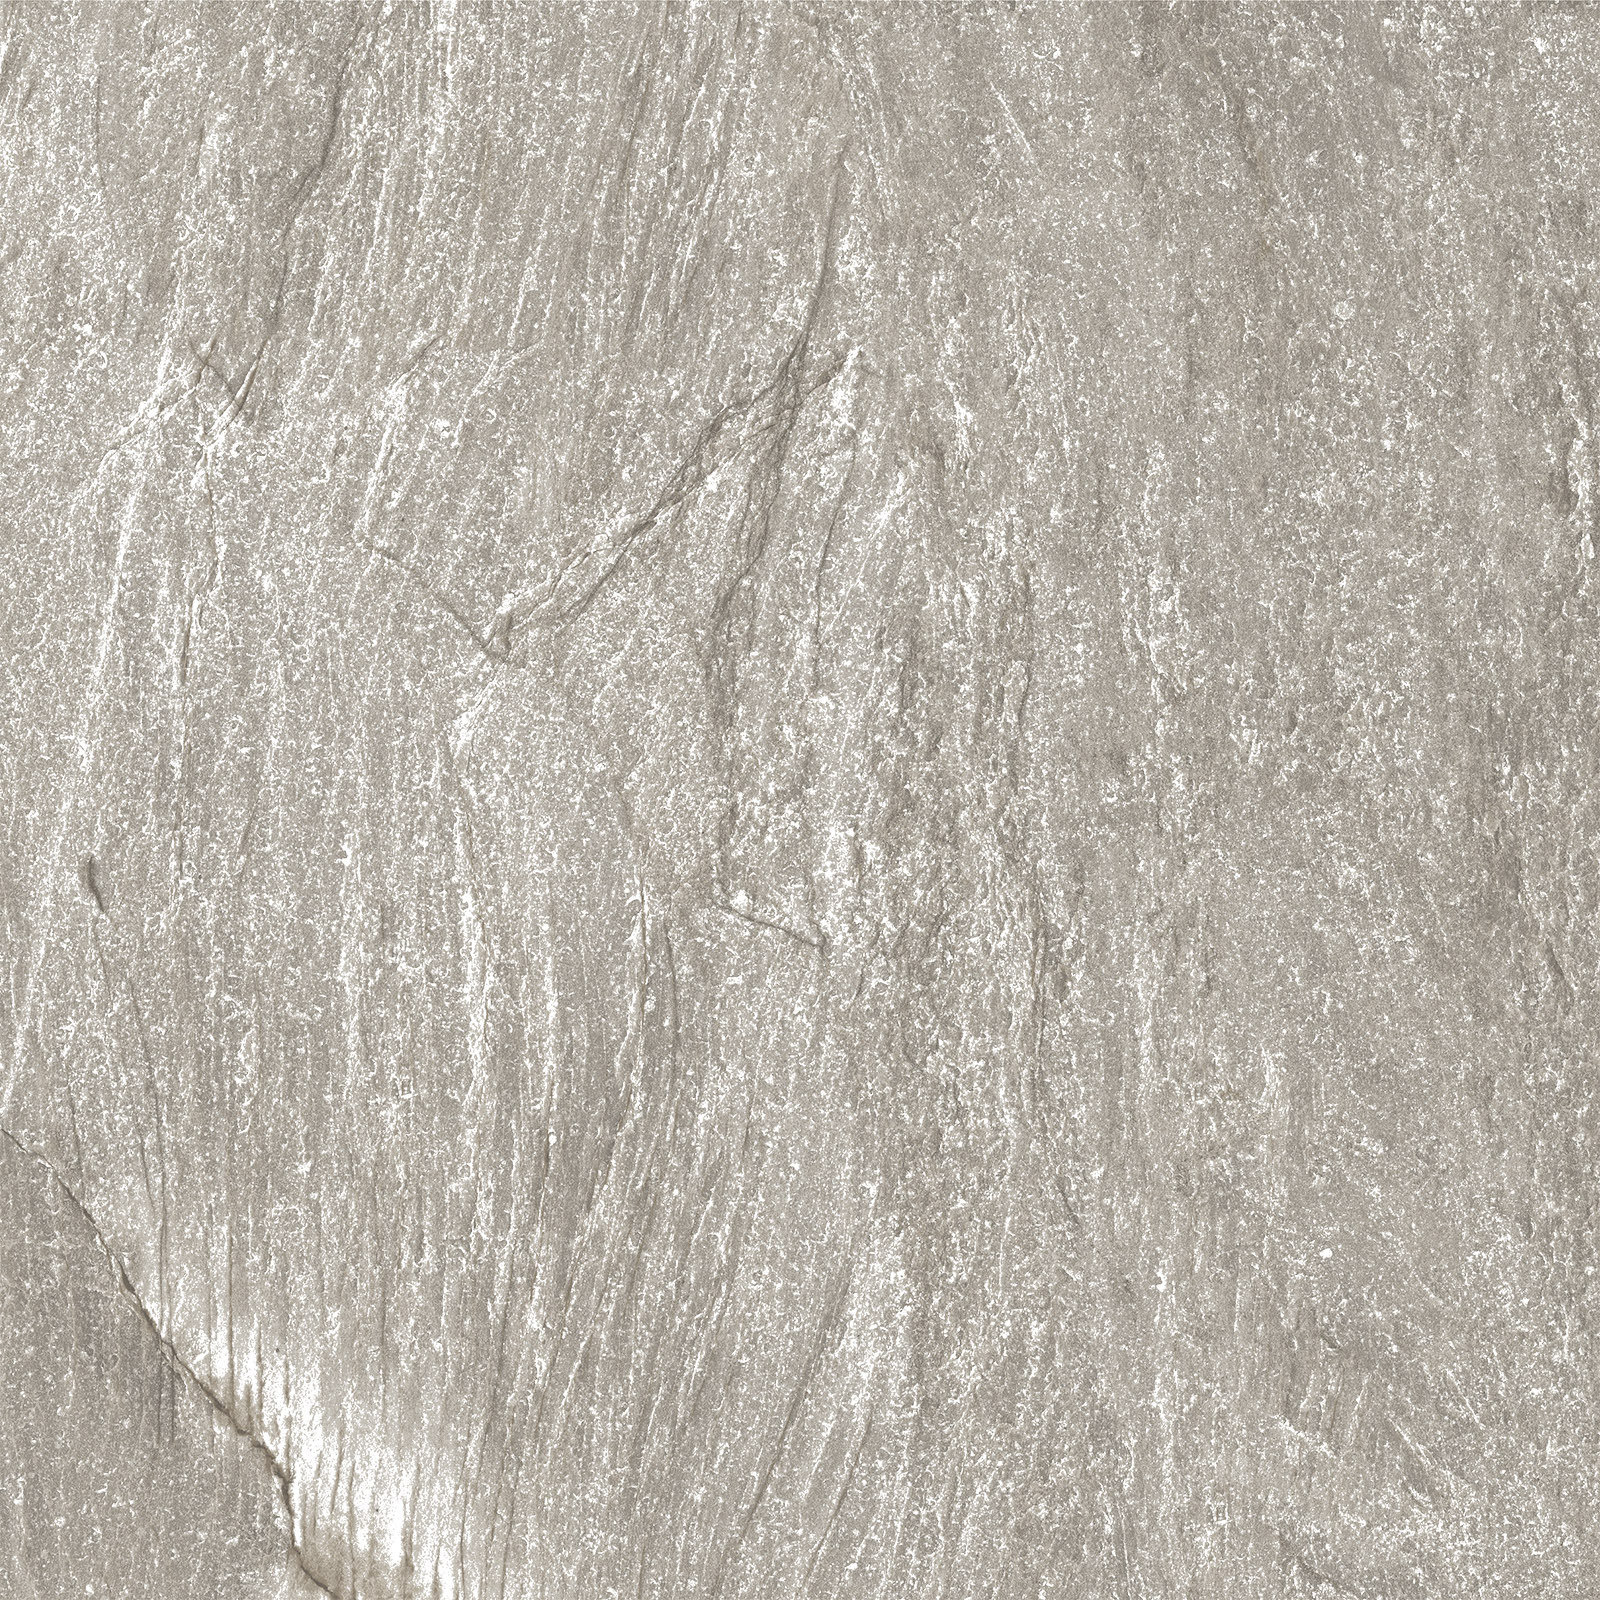 Imola Vibes Beige Scuro Natural Strutturato Matt 179581 60x60cm rectified 10mm - VIBES 60BS RM